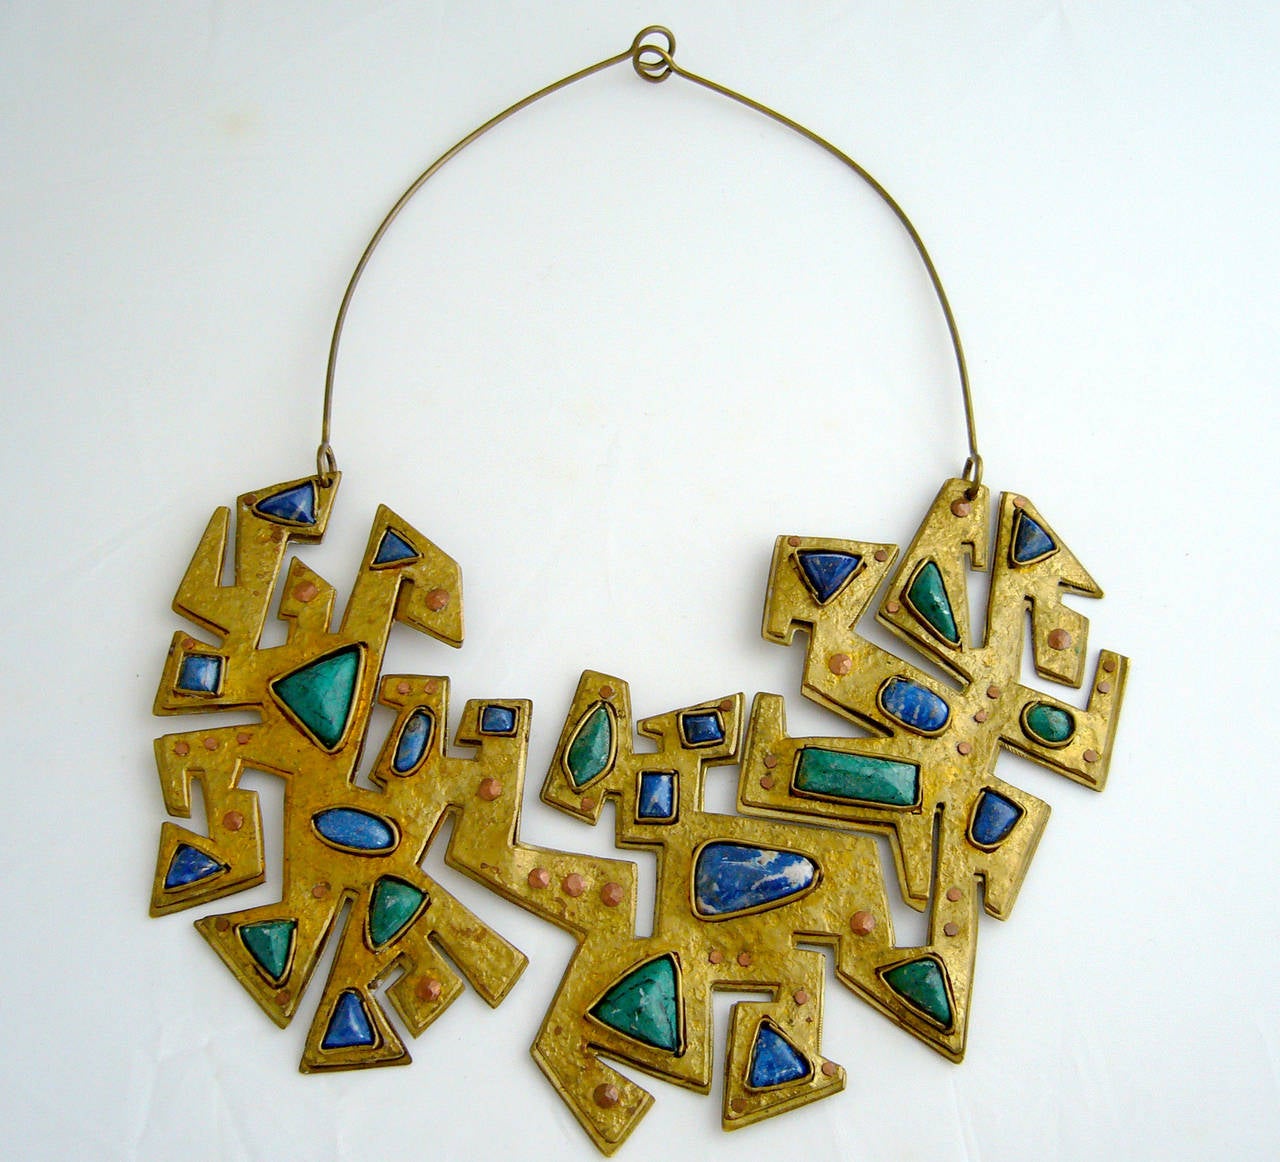 A handmade necklace, of abstract puzzle-cut design made from brass, copper and natural gemstones.  Piece was created by Juan Reyes of Chile. Necklace has a wearable neck length of about 17